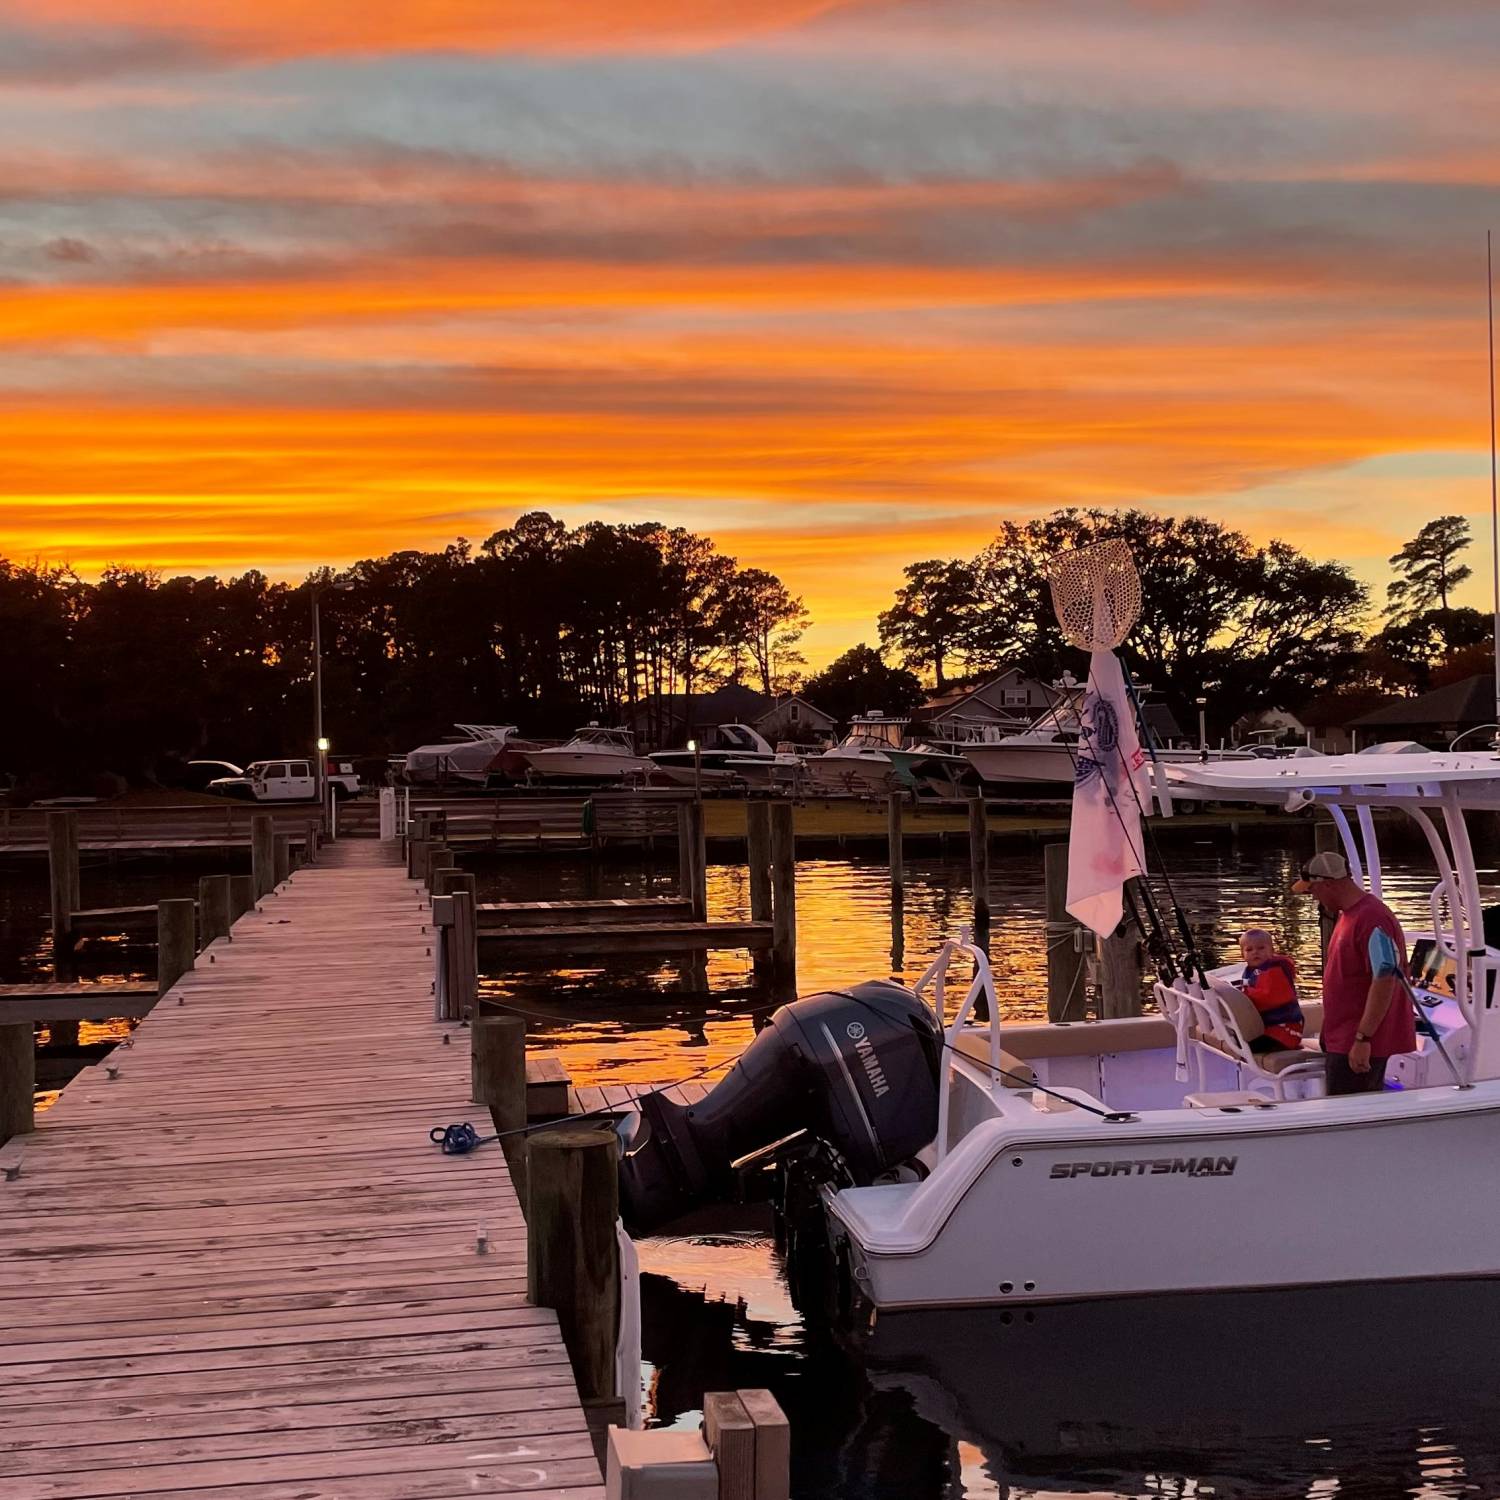 Awesome day of fishing and cruising with the family on Veterans Day with a Beautiful Sunset over the OBX!